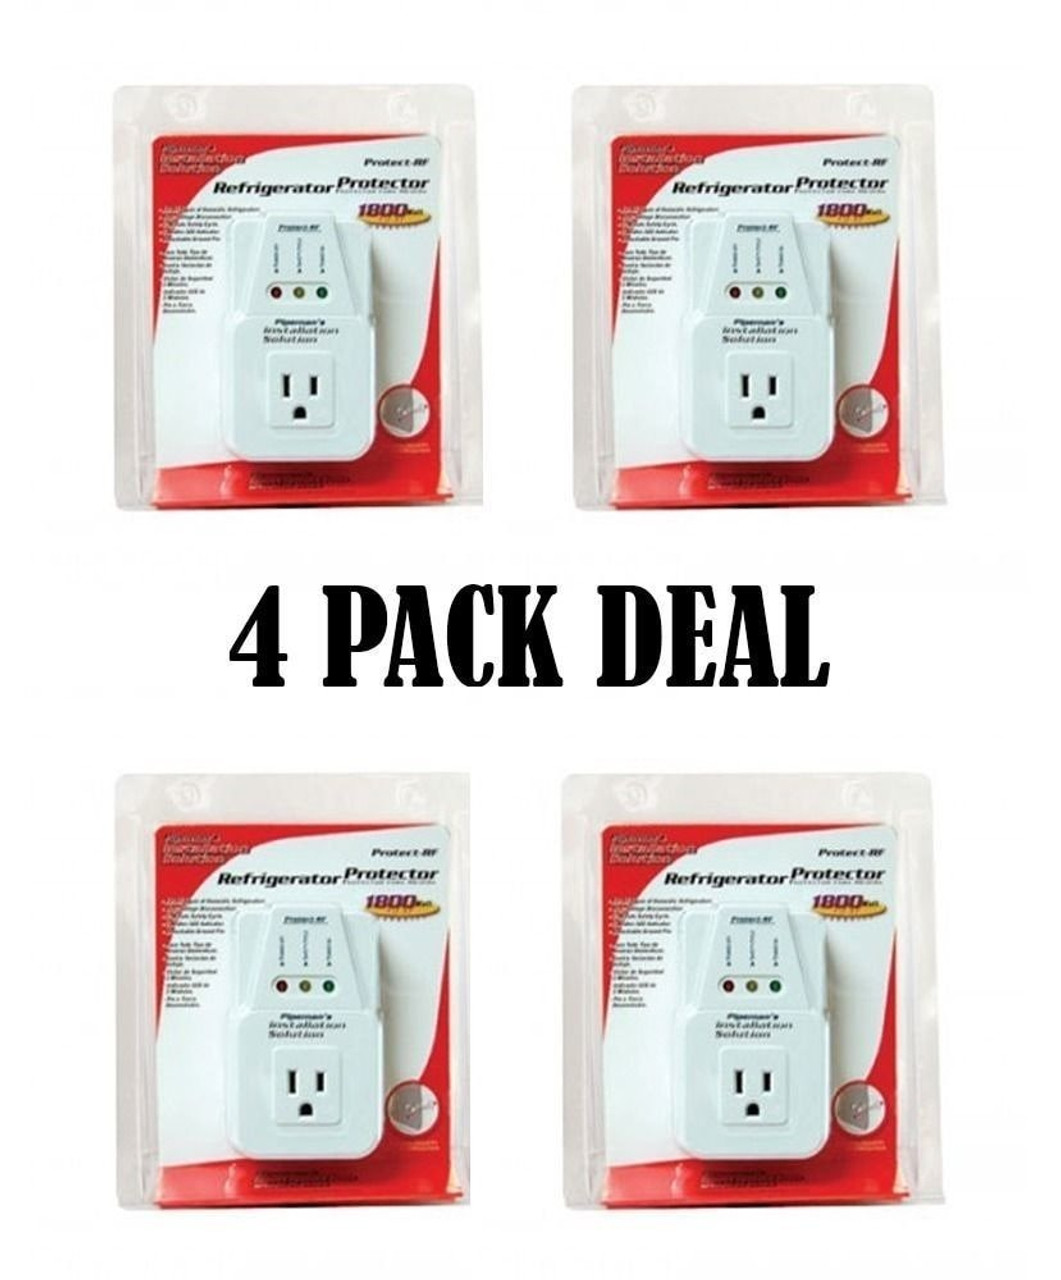 NEW AC Voltage Protector Brownout Surge Refrigerator 1800 Watts Appliance 4  PACK - Best Connections